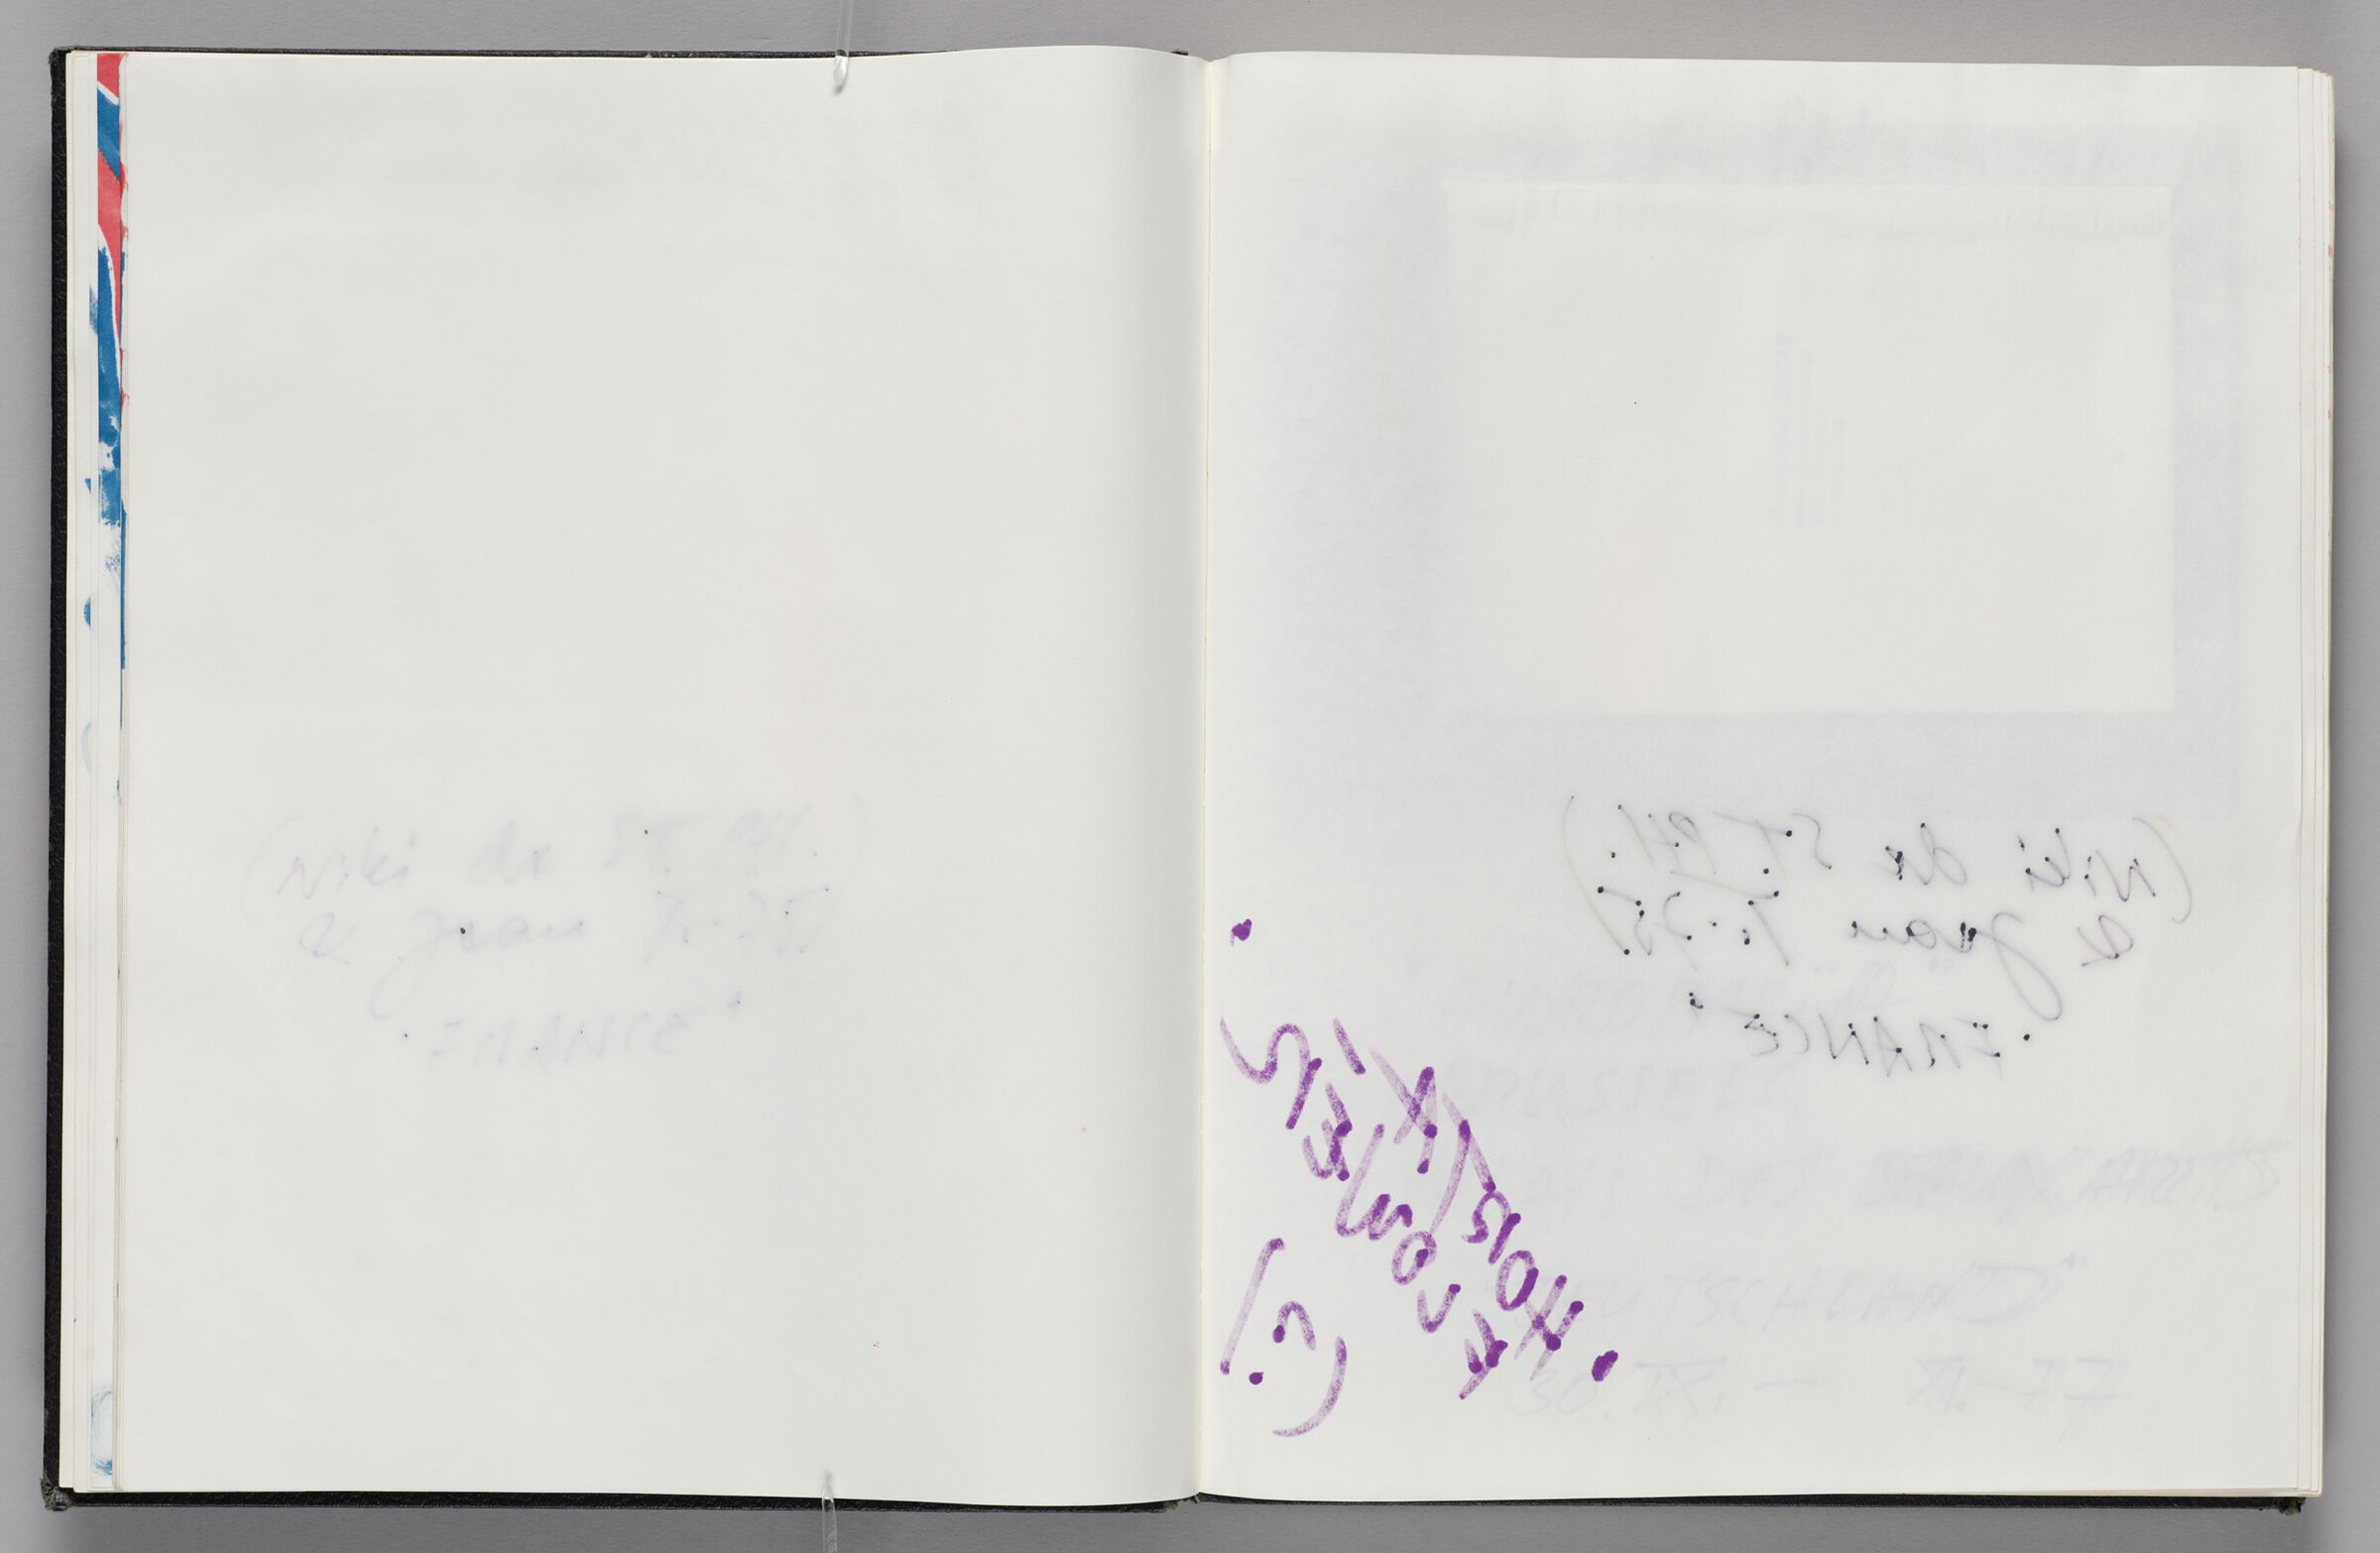 Untitled (Color Transfer Of Text On Following Pages, Left Page); Untitled (Bleed-Through Of Following Page, Right Page)